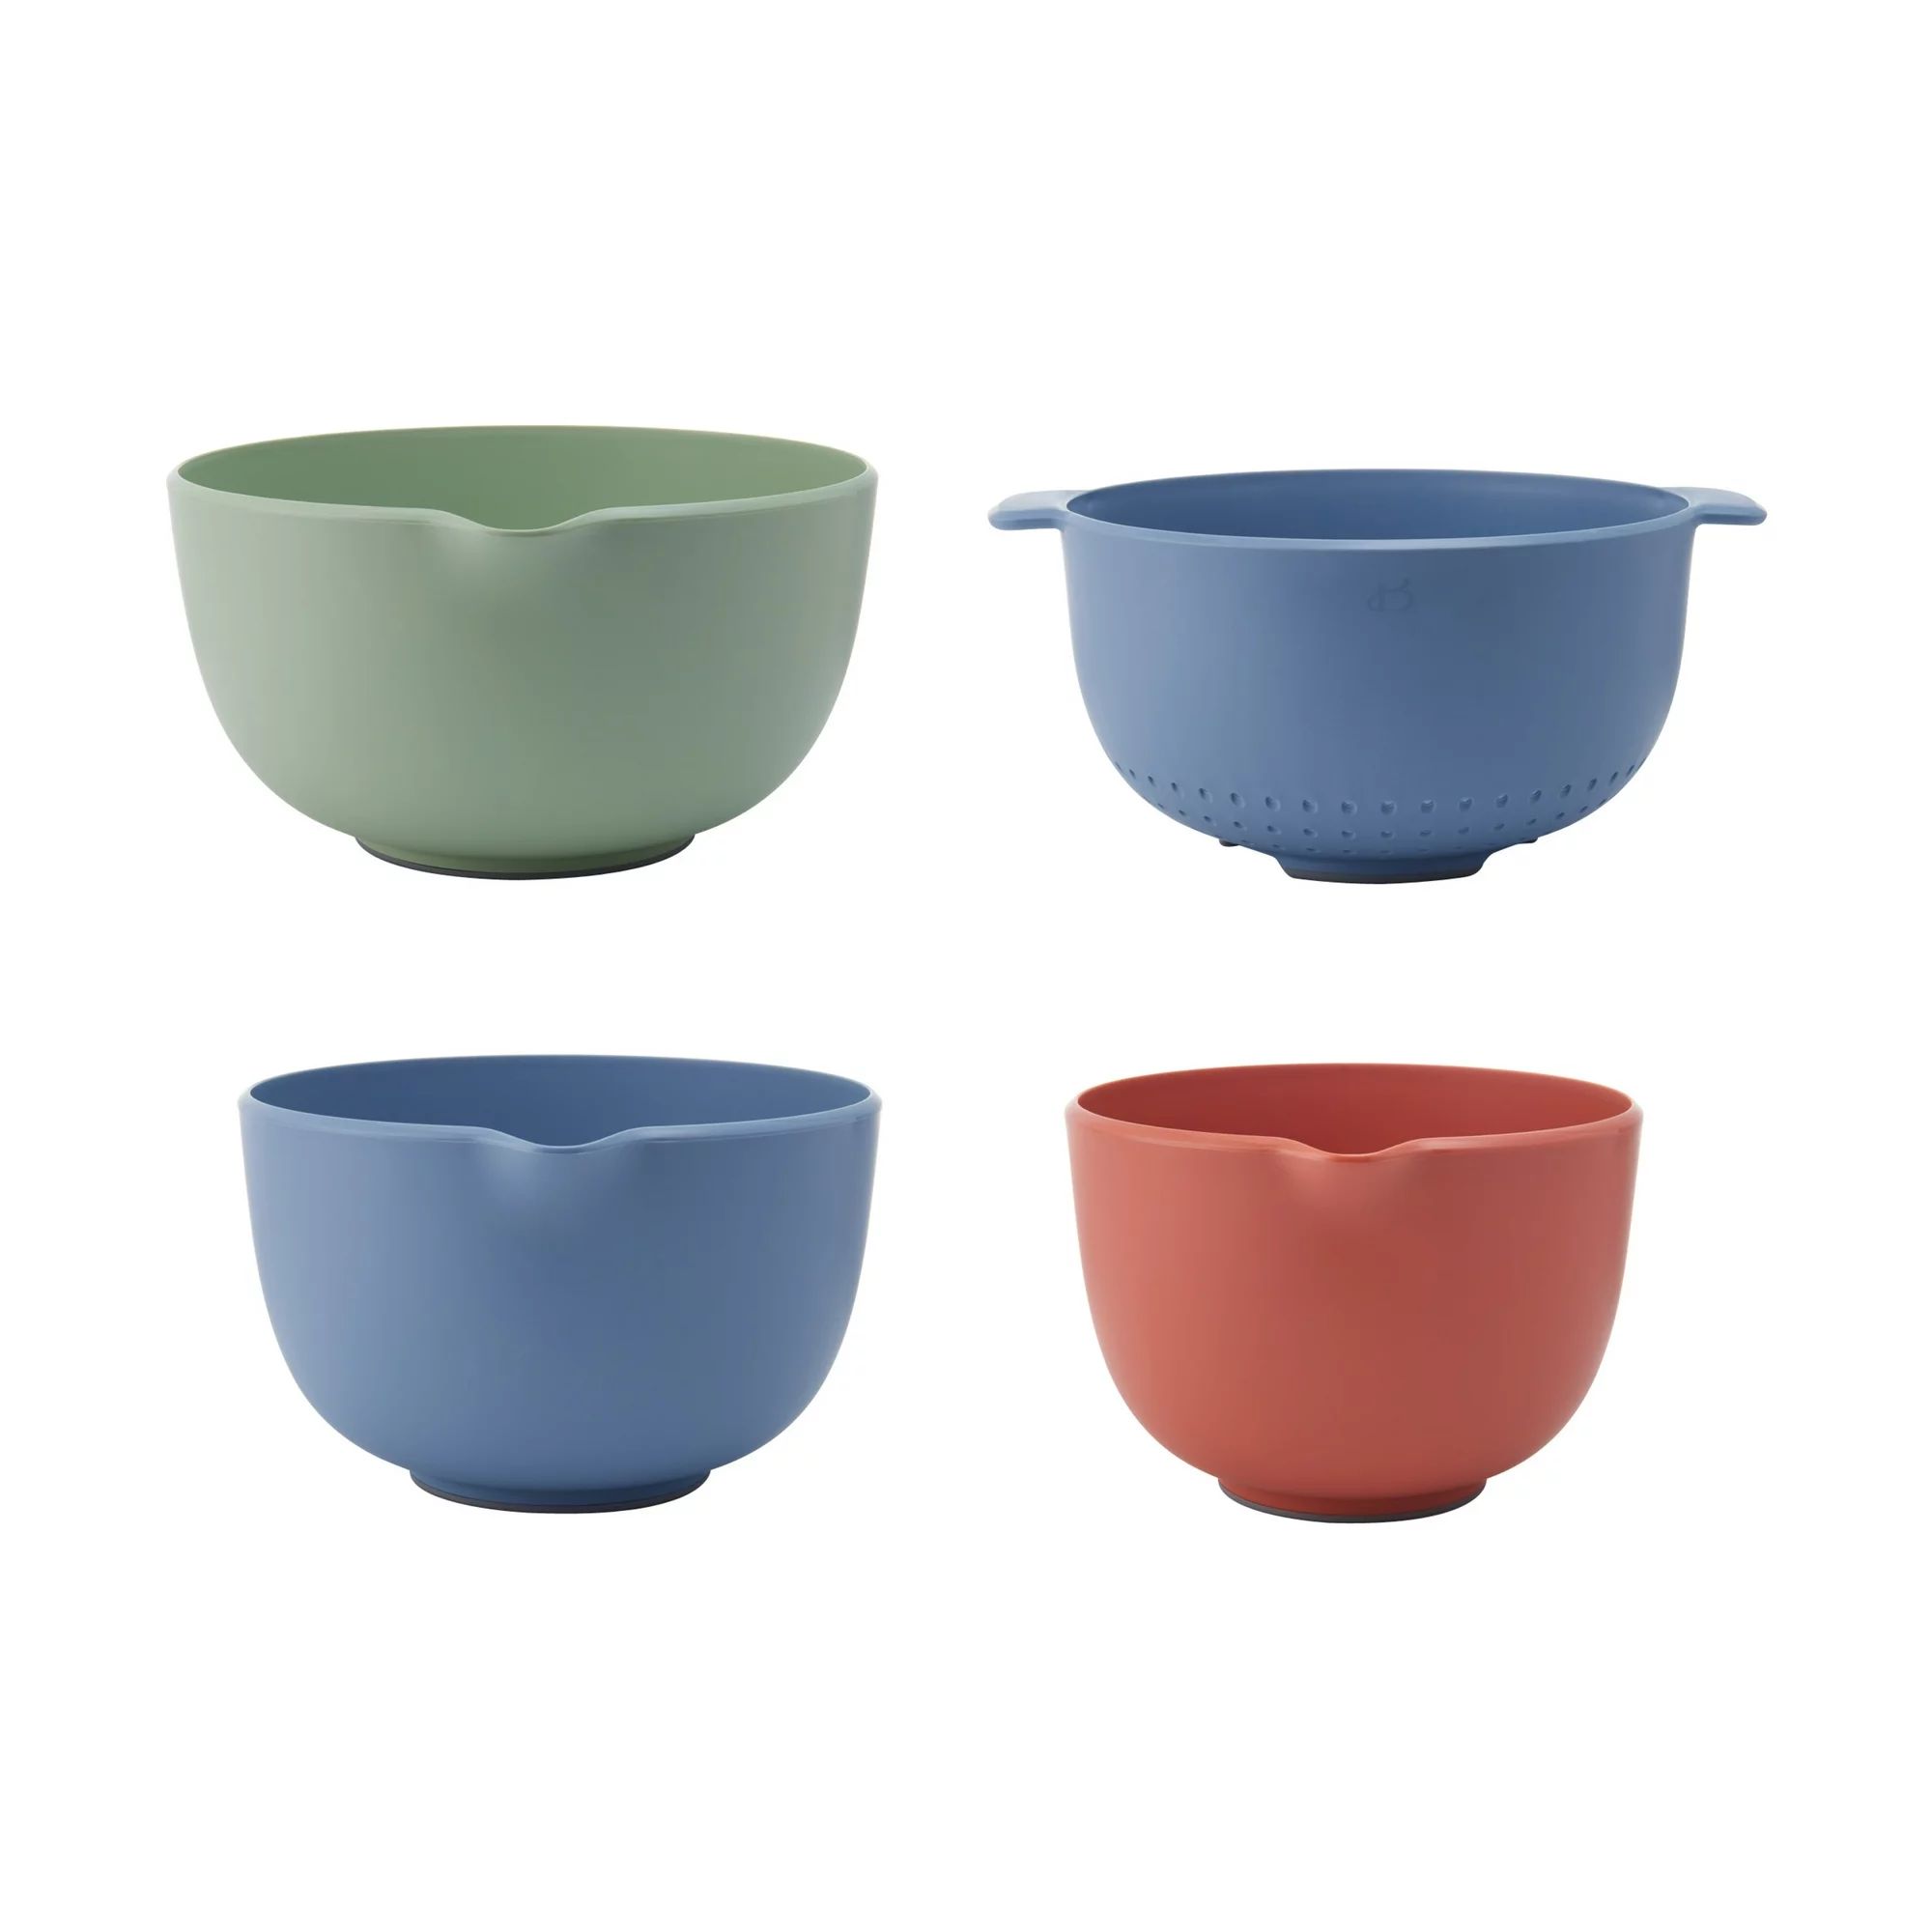 Beautiful Mixing Bowls and Colander Set Sage, Cinnamon and Blue Icing by Drew Barrymore | Walmart (US)